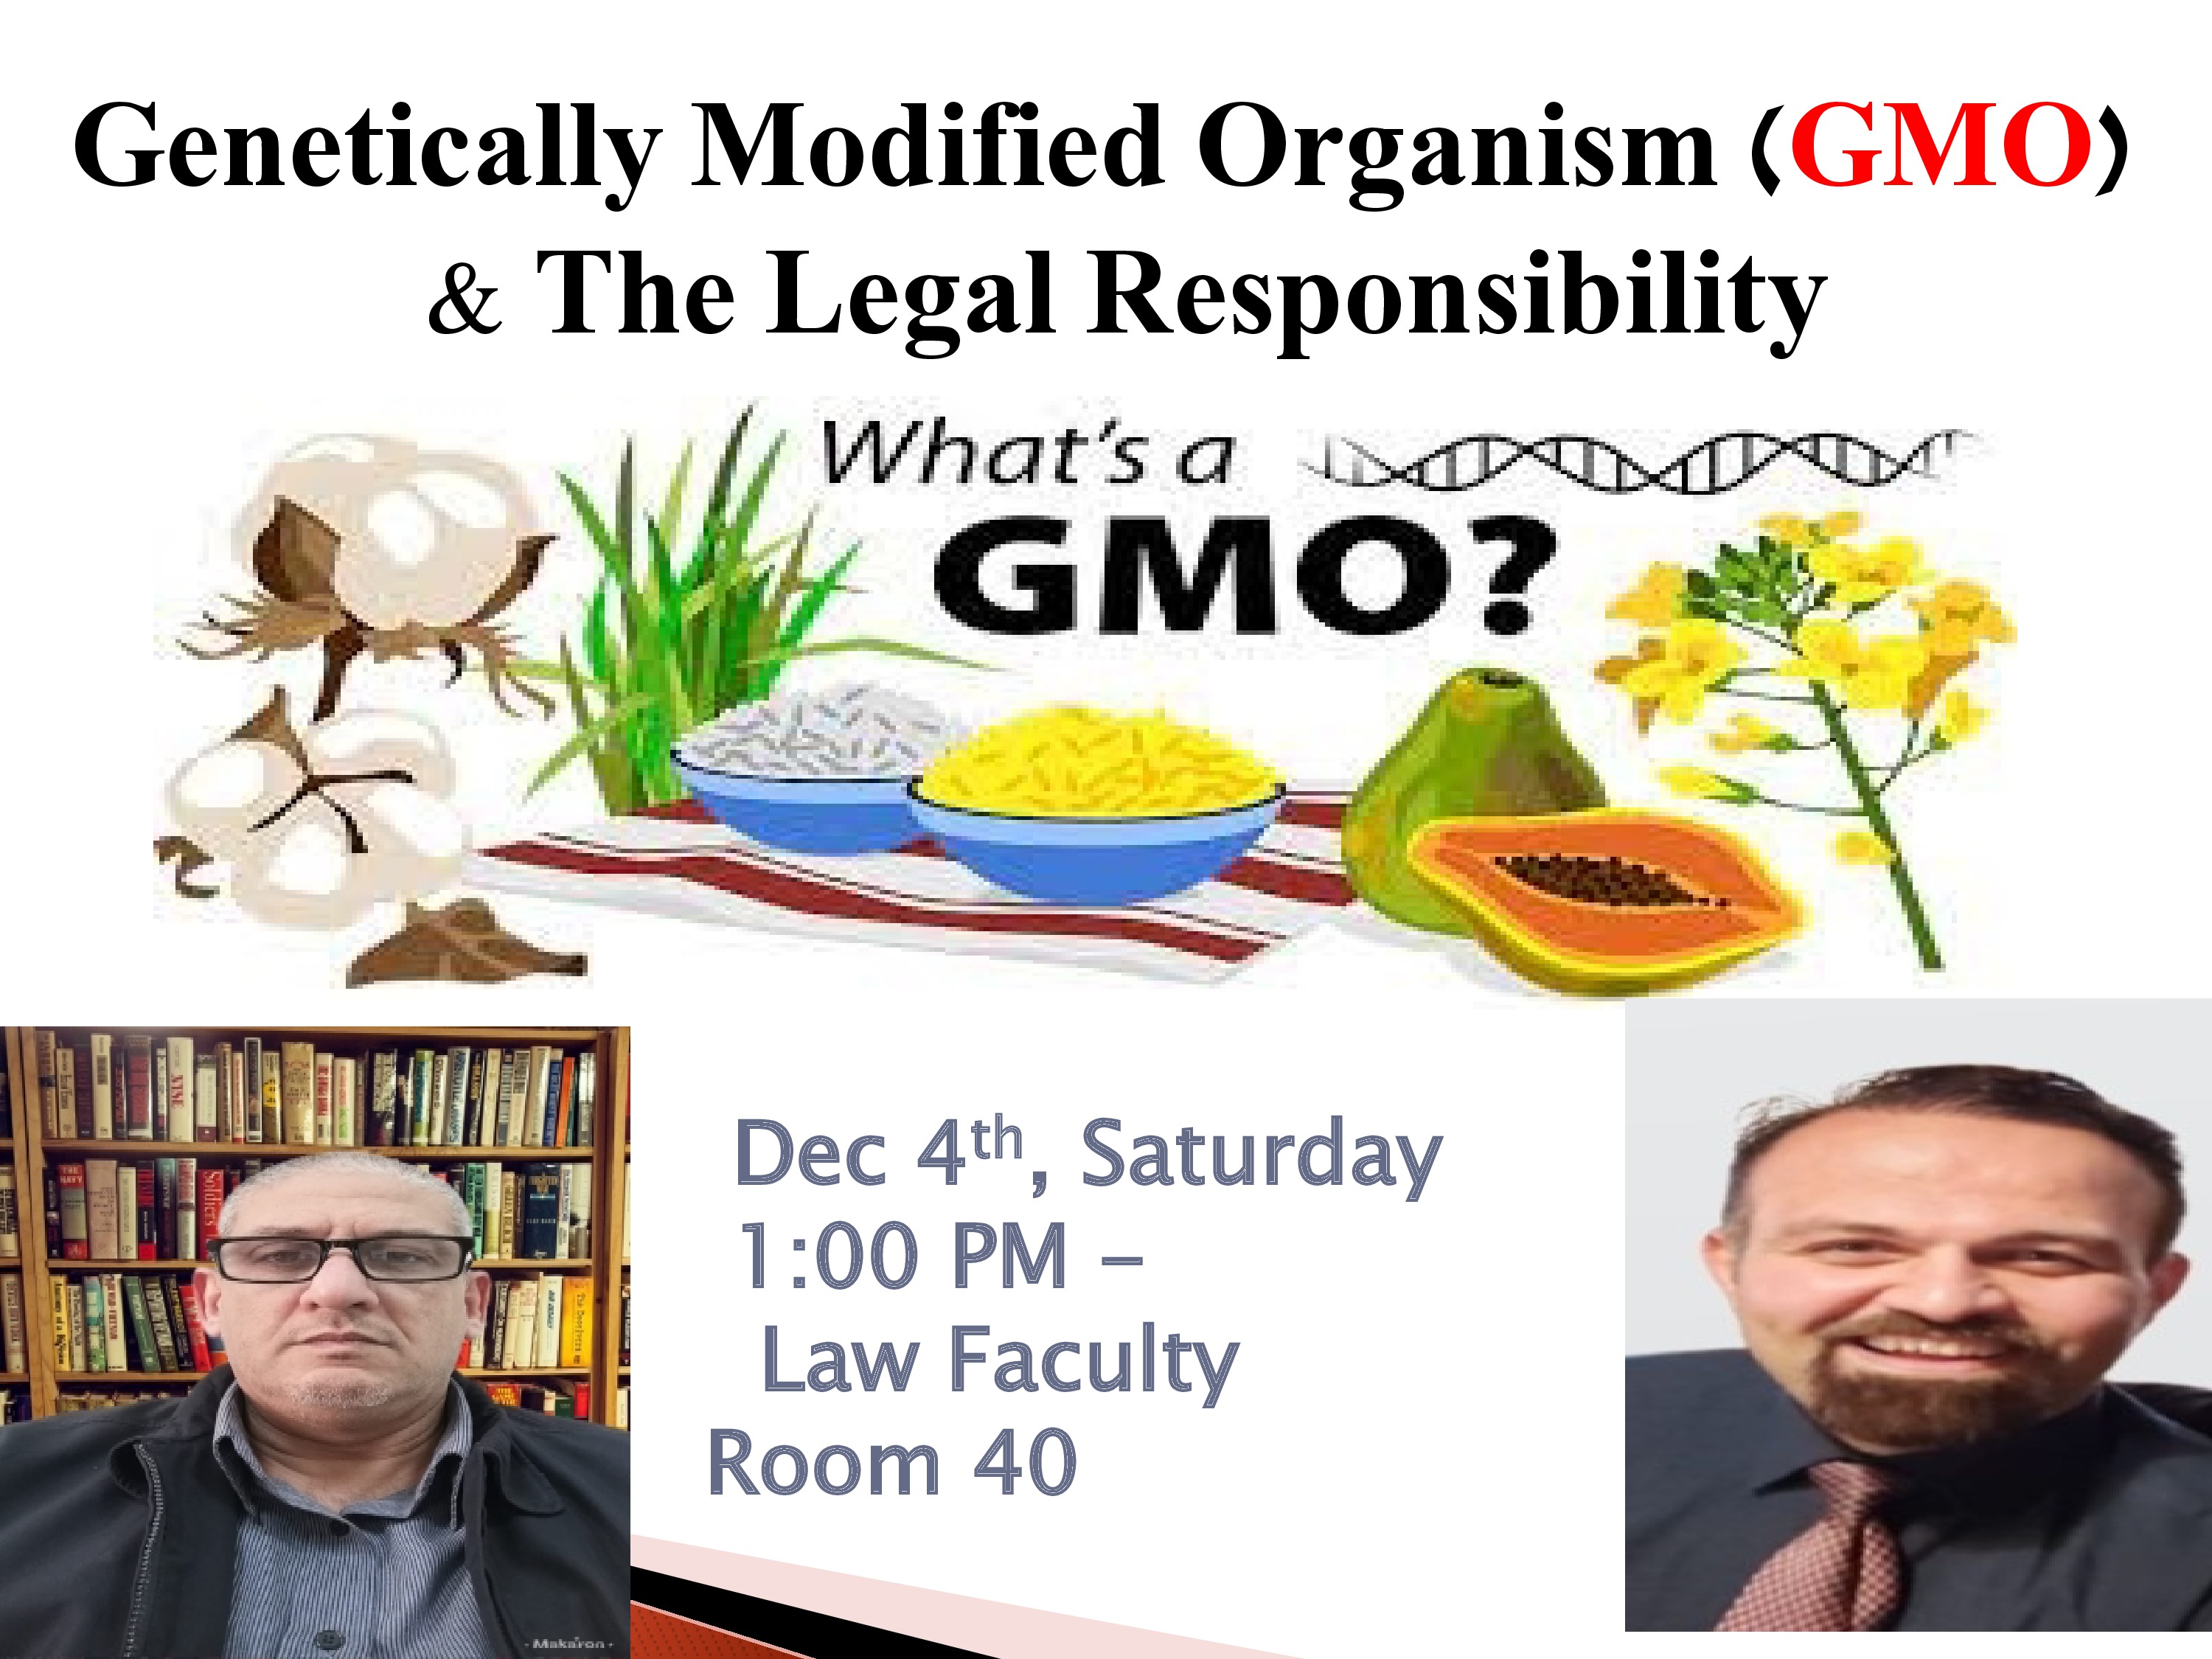 Genetically Modified Organism (GMO) & The Legal Responsibility